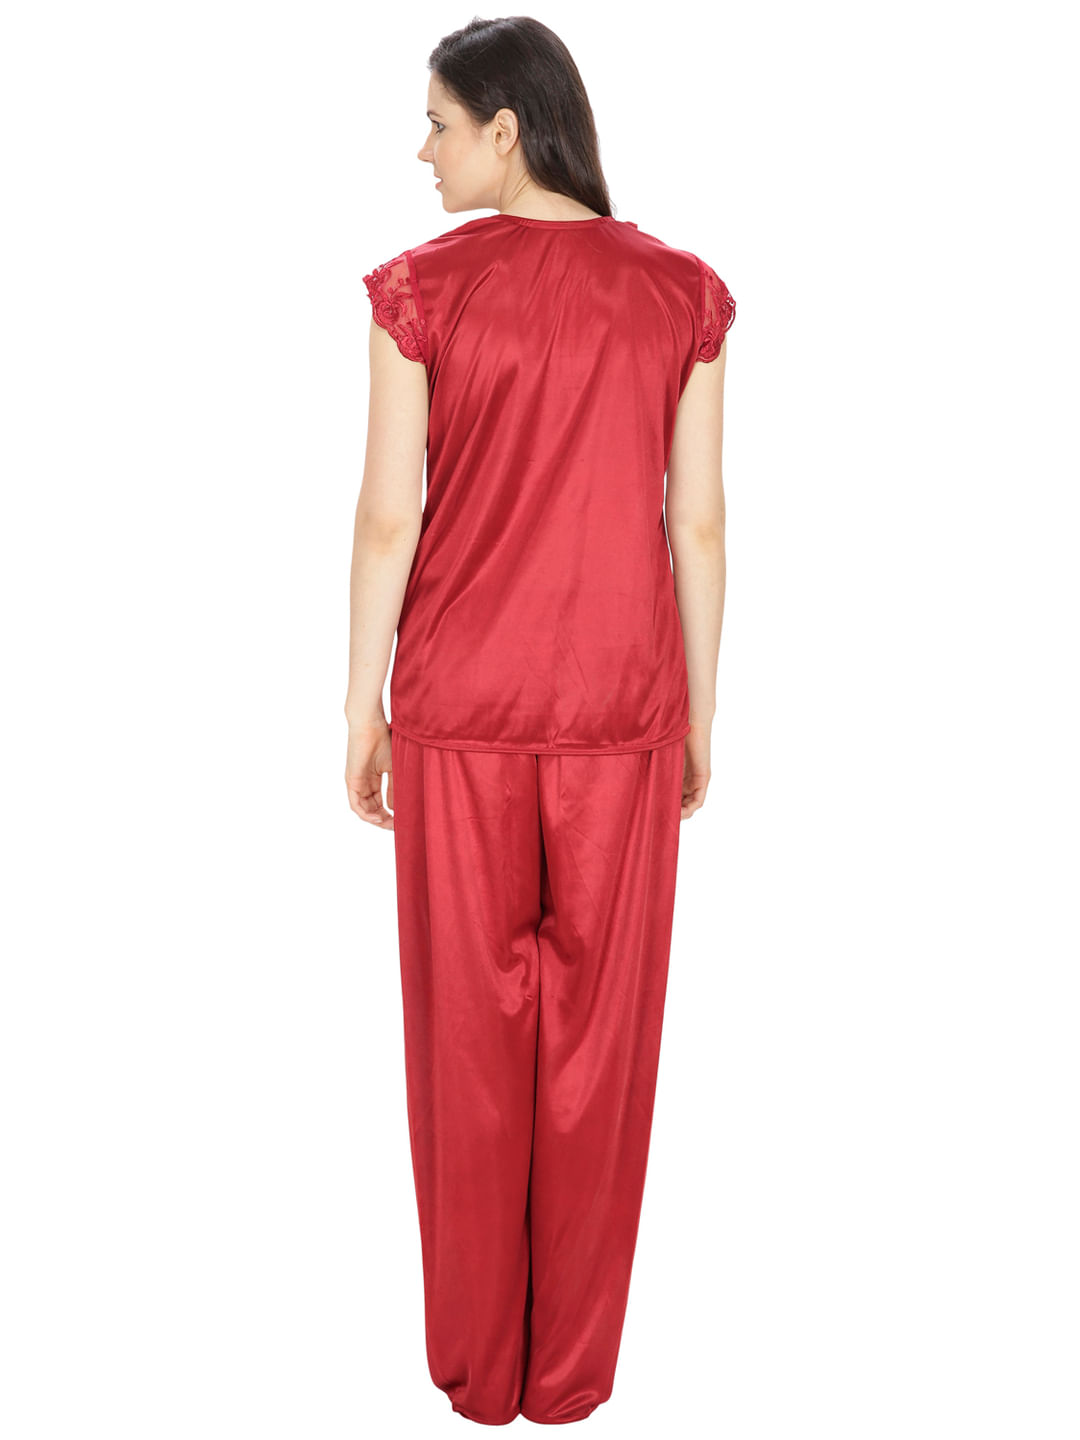 Satin Maroon Nightsuit Set with Slippers (Maroon, Free Size)